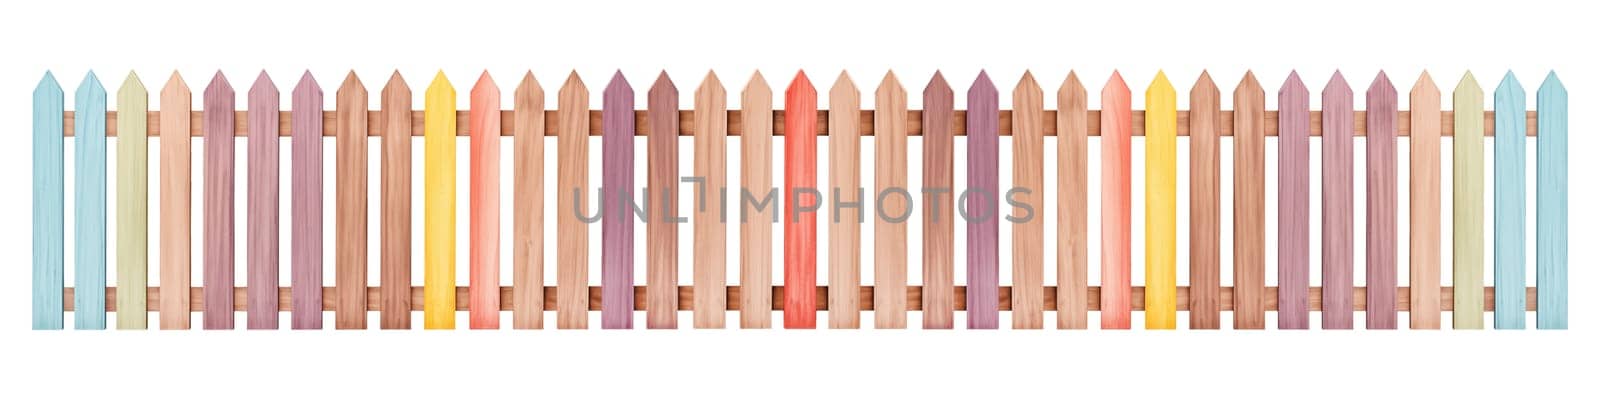 A set of various wooden fences on a transparent background, featuring long strips of wooden fences painted in different colors. The fencing is designed in a style reminiscent of a kindergarten. by SERSOL